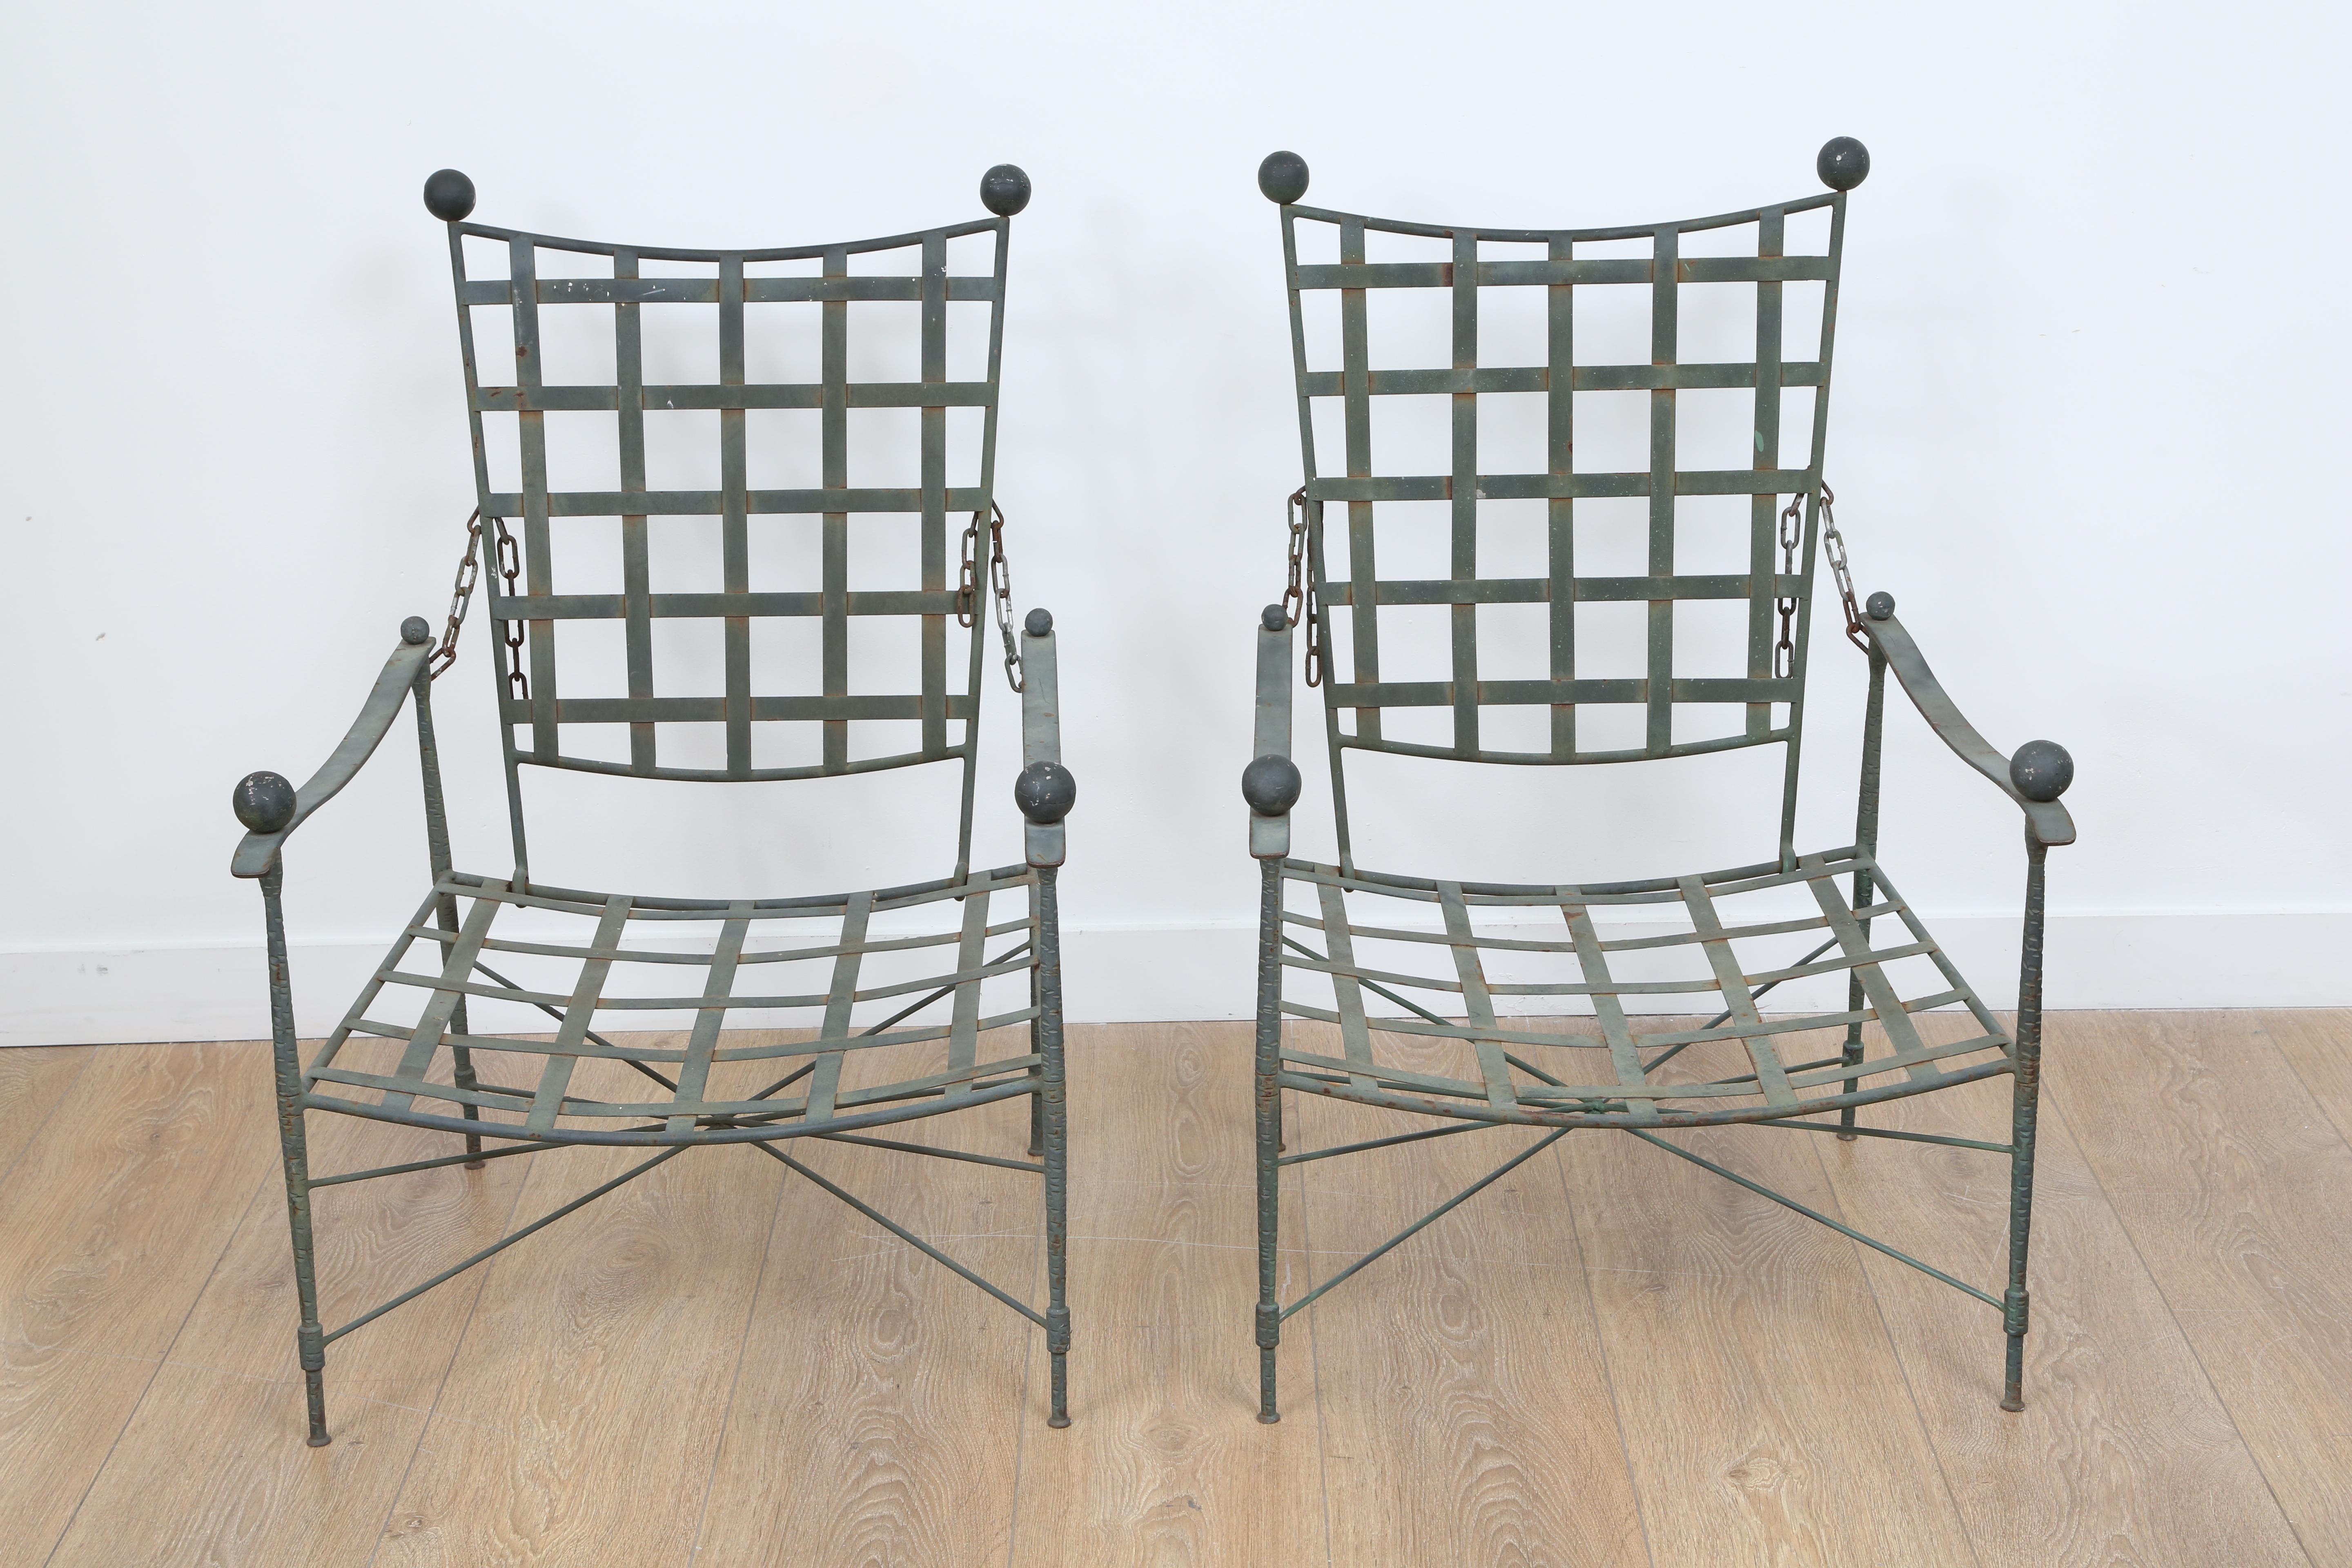 Pair of vintage adjustable lounge patio chairs, 1 ottoman and 1 side (not shown) table by Mario Papperzini for Salterini.
Upholstery per your own specification by our local artisan, 5 yards each chairs, 2 yards for the ottoman. Upholstery not